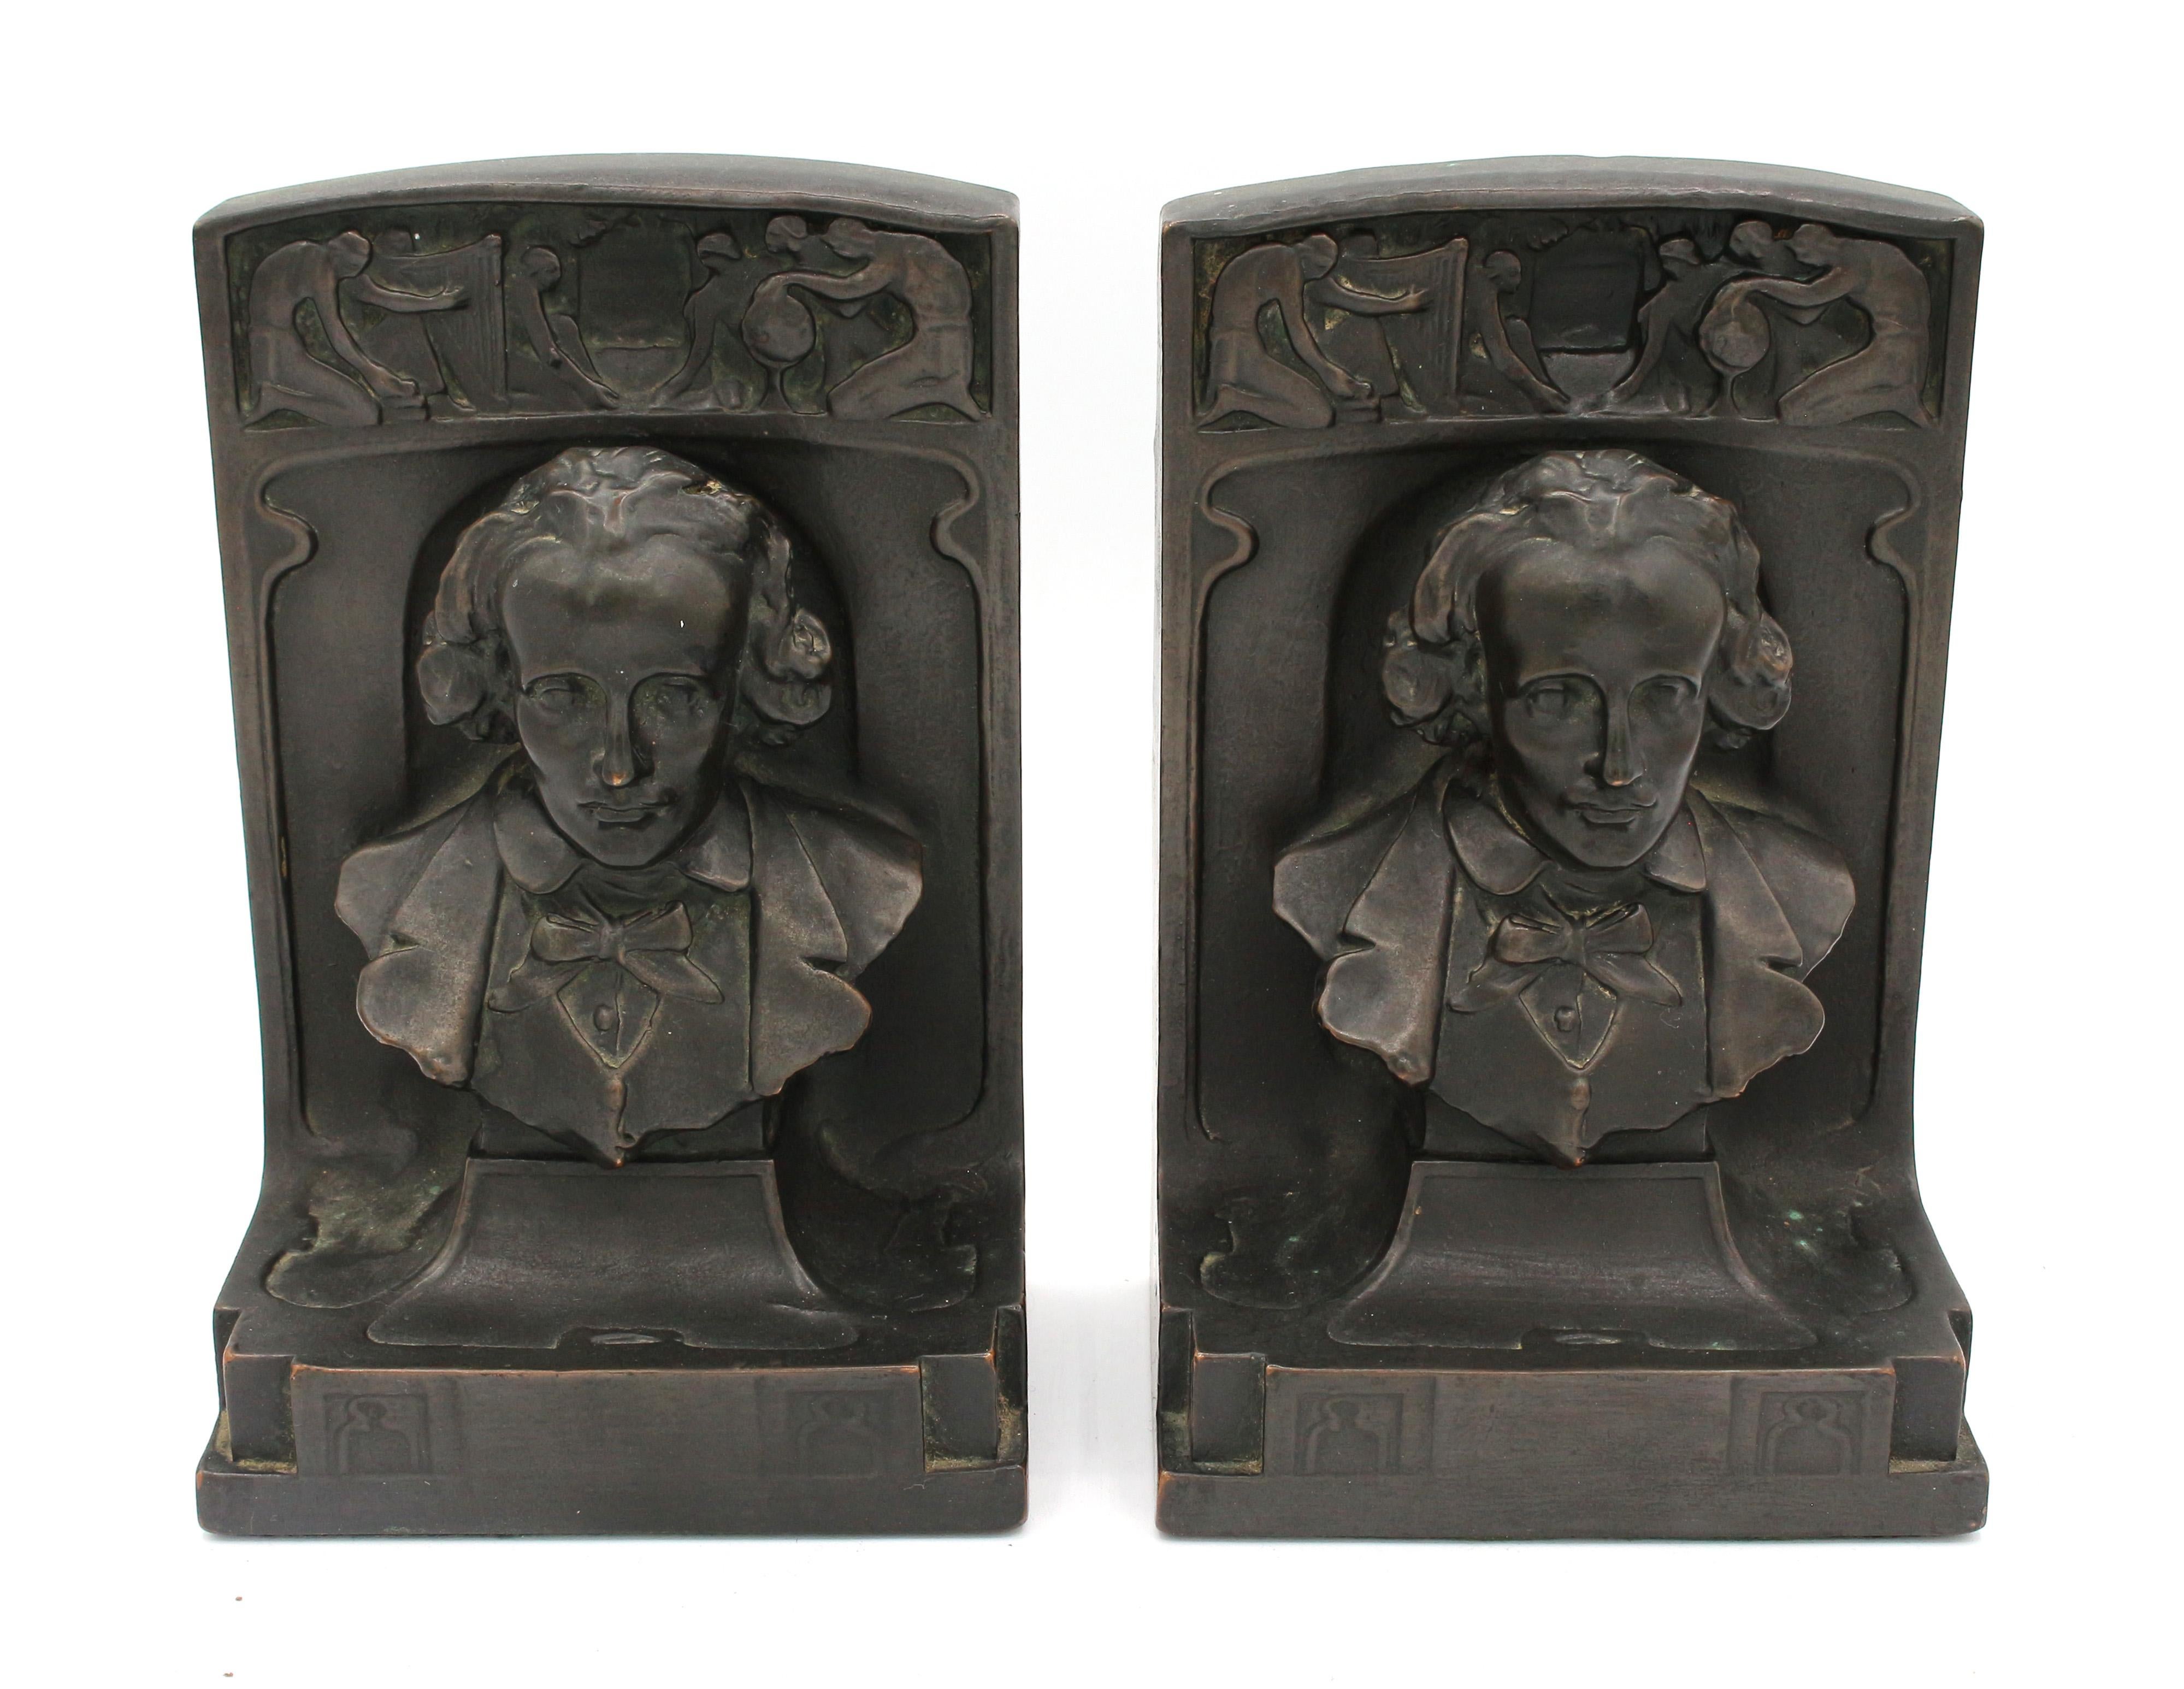 Circa 1920s-30s pair of bookends by the Pompeian Bronze Company. Copyright 1921. A thin veneer of patinated bronze is molded over a heavy casting. Art Deco motifs with the arts in bas relief. The busts appear to Beethoven.
7